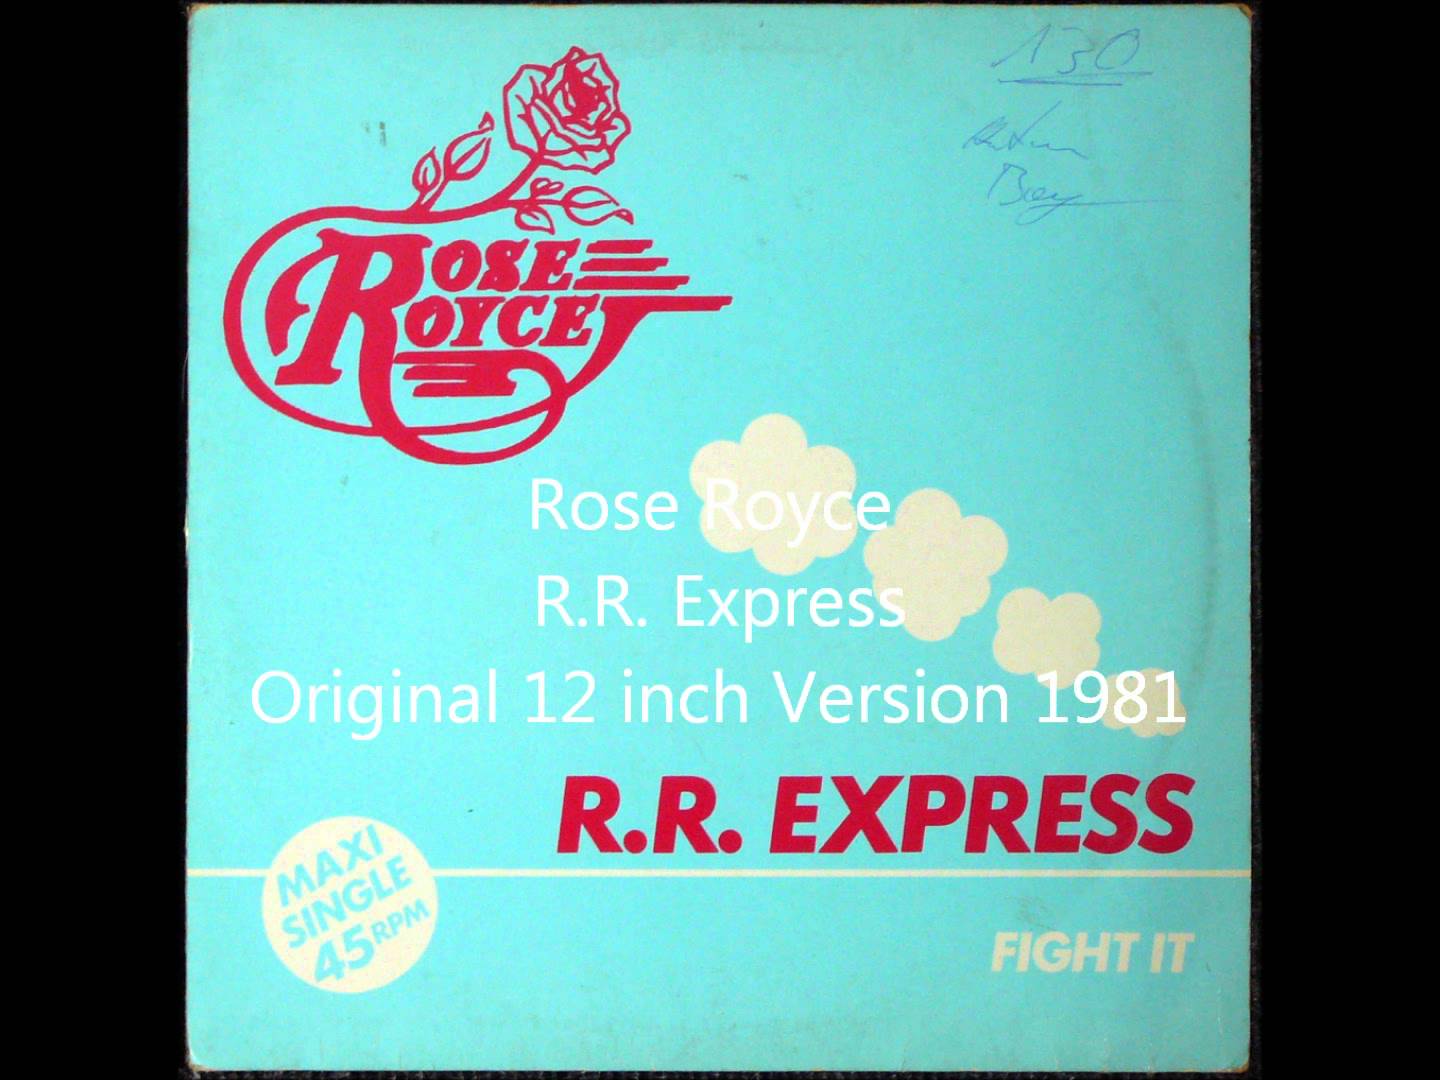 Art for R.R. Express Original 12 inch Version 1981 by Rose Royce